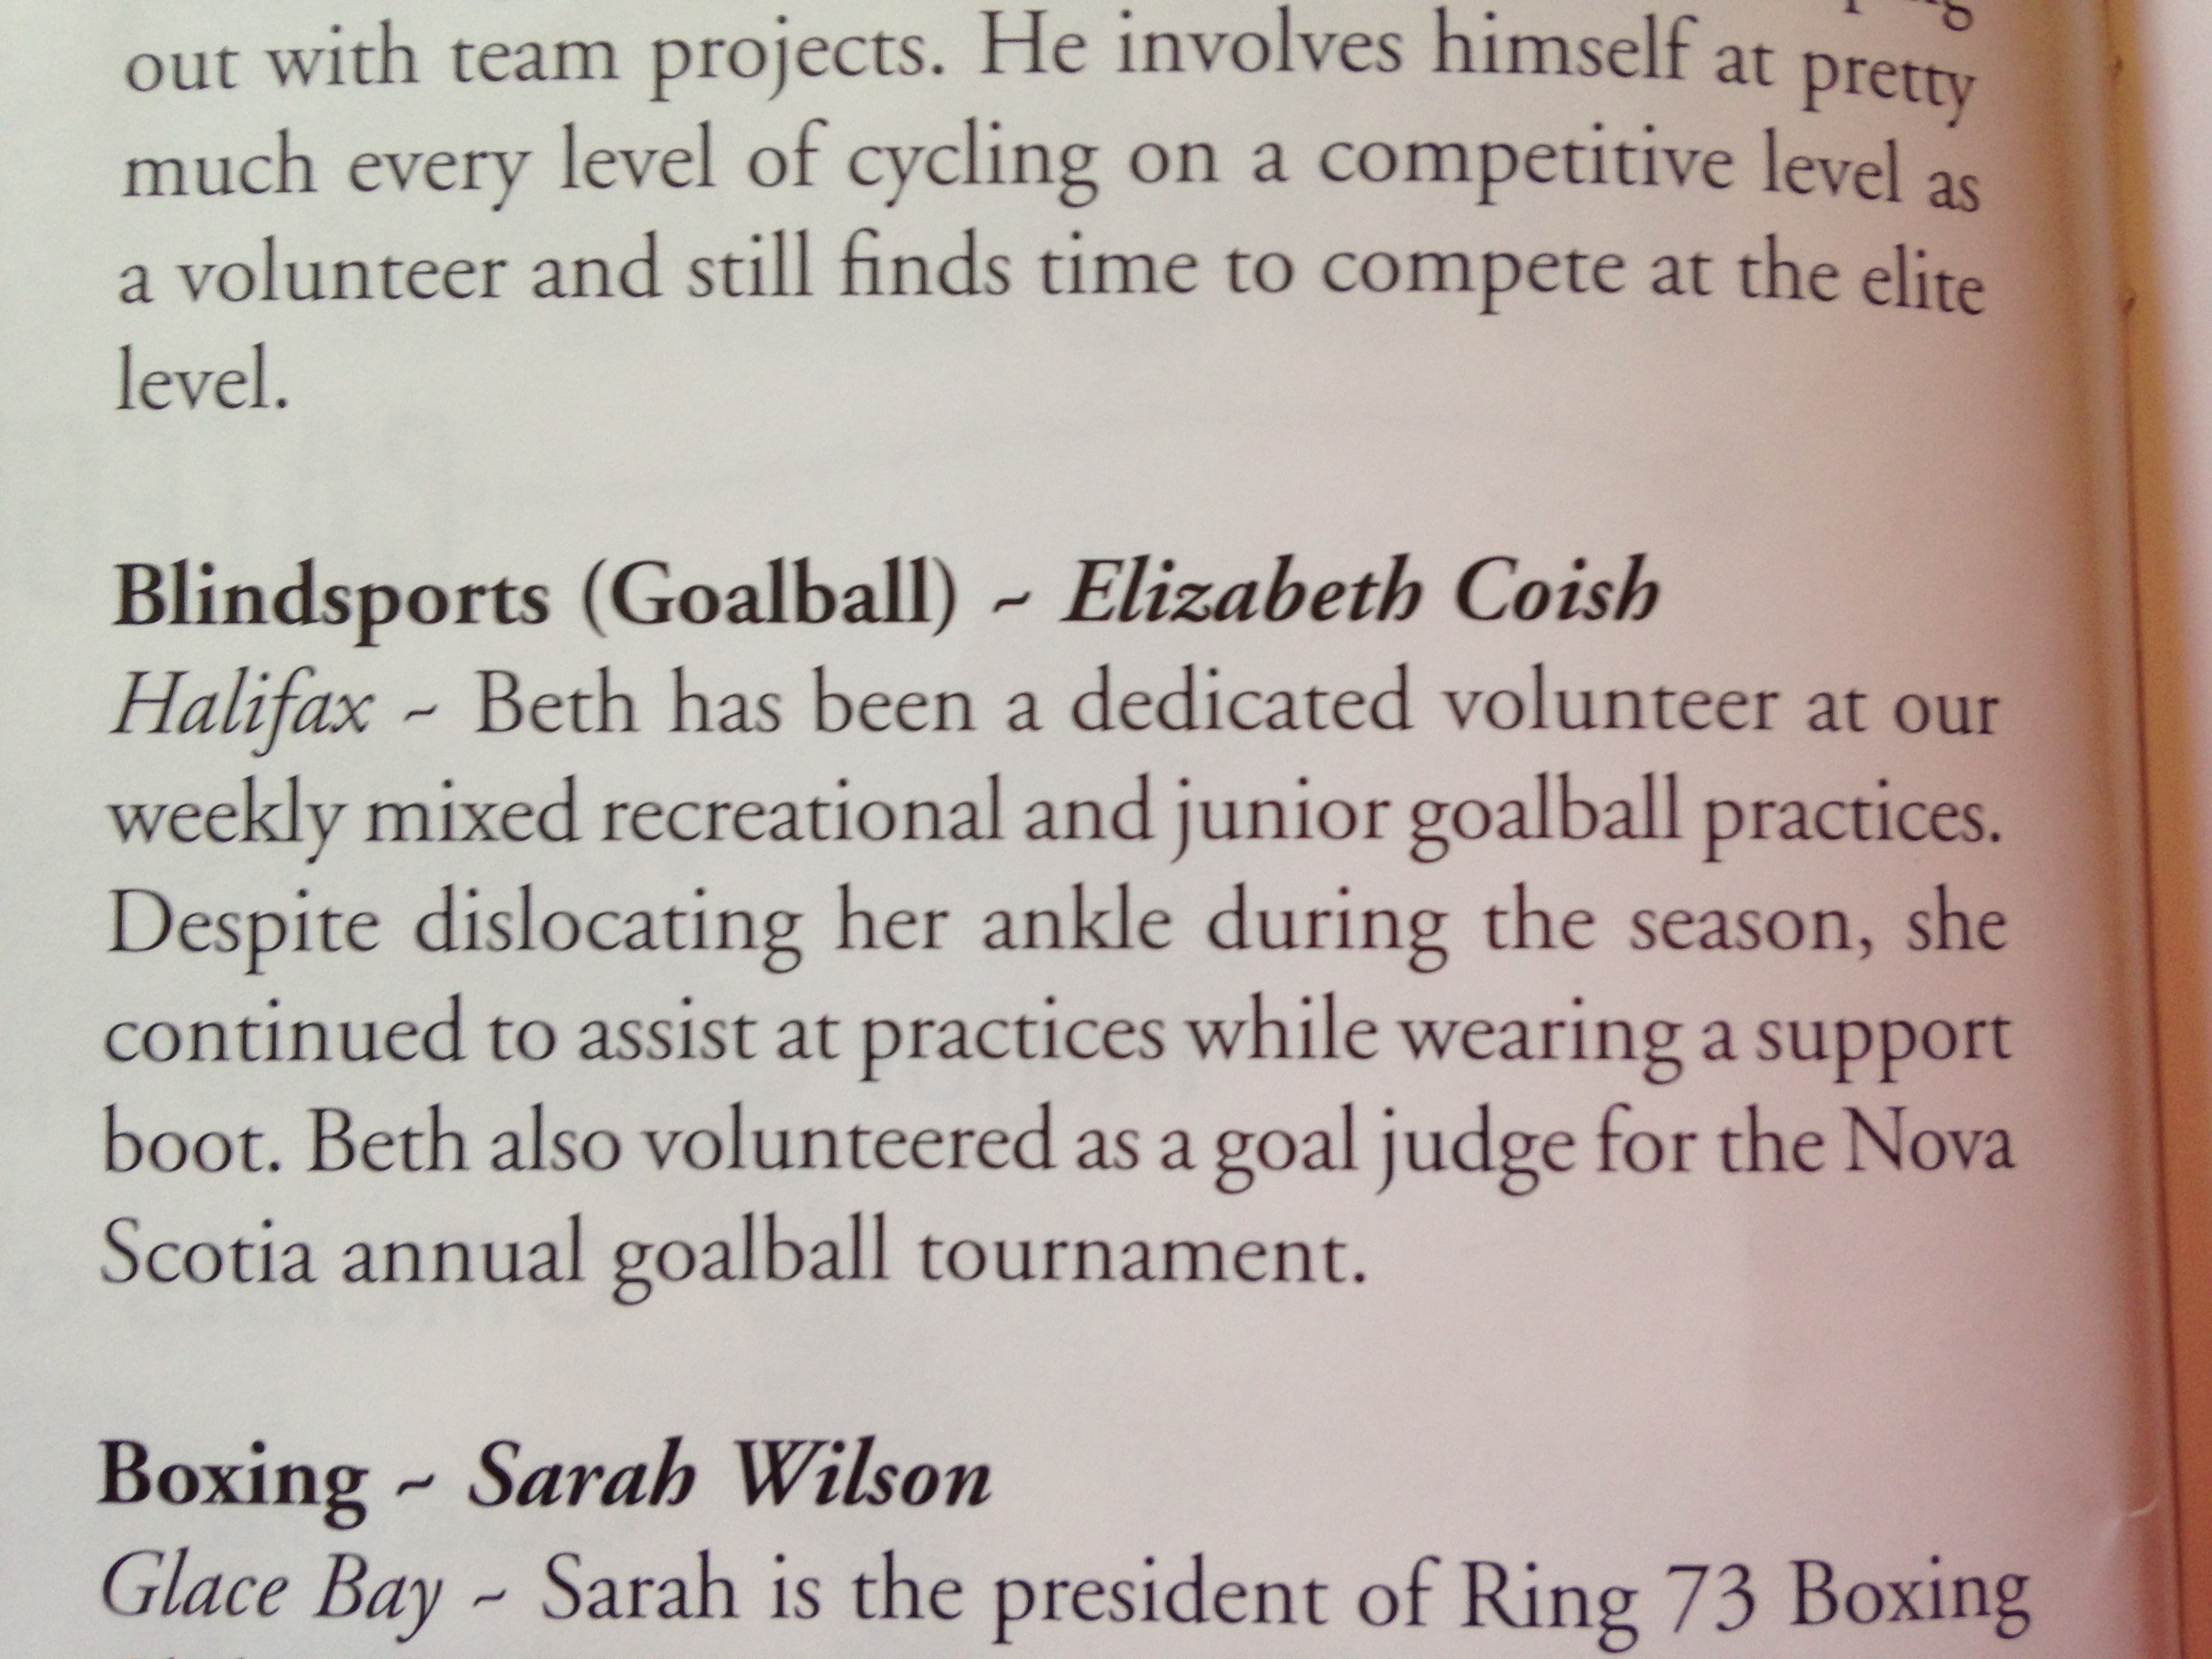 Volunteer of the Year - Beth Coish, Halifax  Beth has been a dedicated volunteer at our weekly mixed recreational and junior goalball practices. Despite disloacting her ankle during the season, she continued to assist at practices while wearing a support boot. Beth also volunteered as a goal judge for the Nova Scotia Open annual goalball tournamen